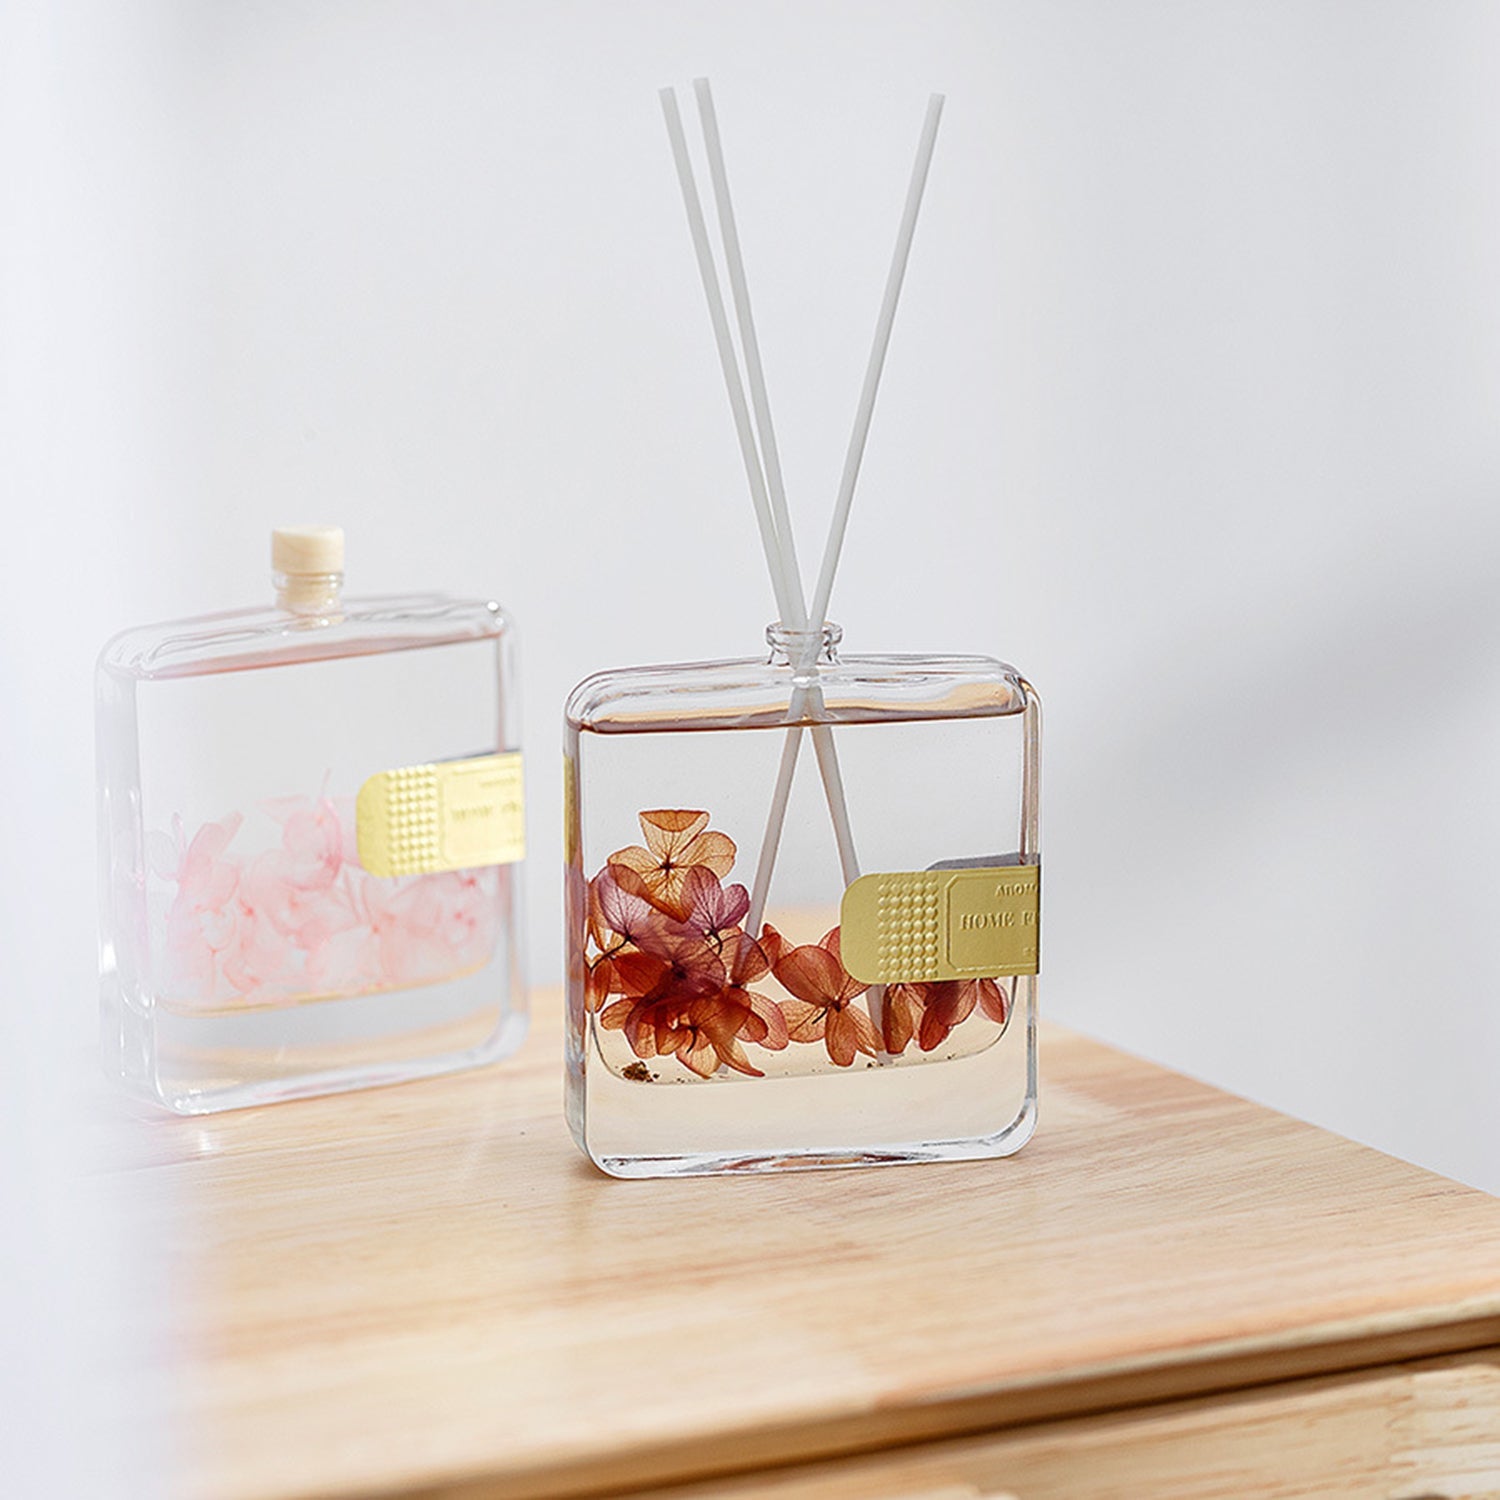 CITTA Falling Cherry Blossoms Series Reed Diffuser Aromatherapy 100ML Premium Essential Oil with Reed Stick and Dry Flower Reed Diffuser CITTA 